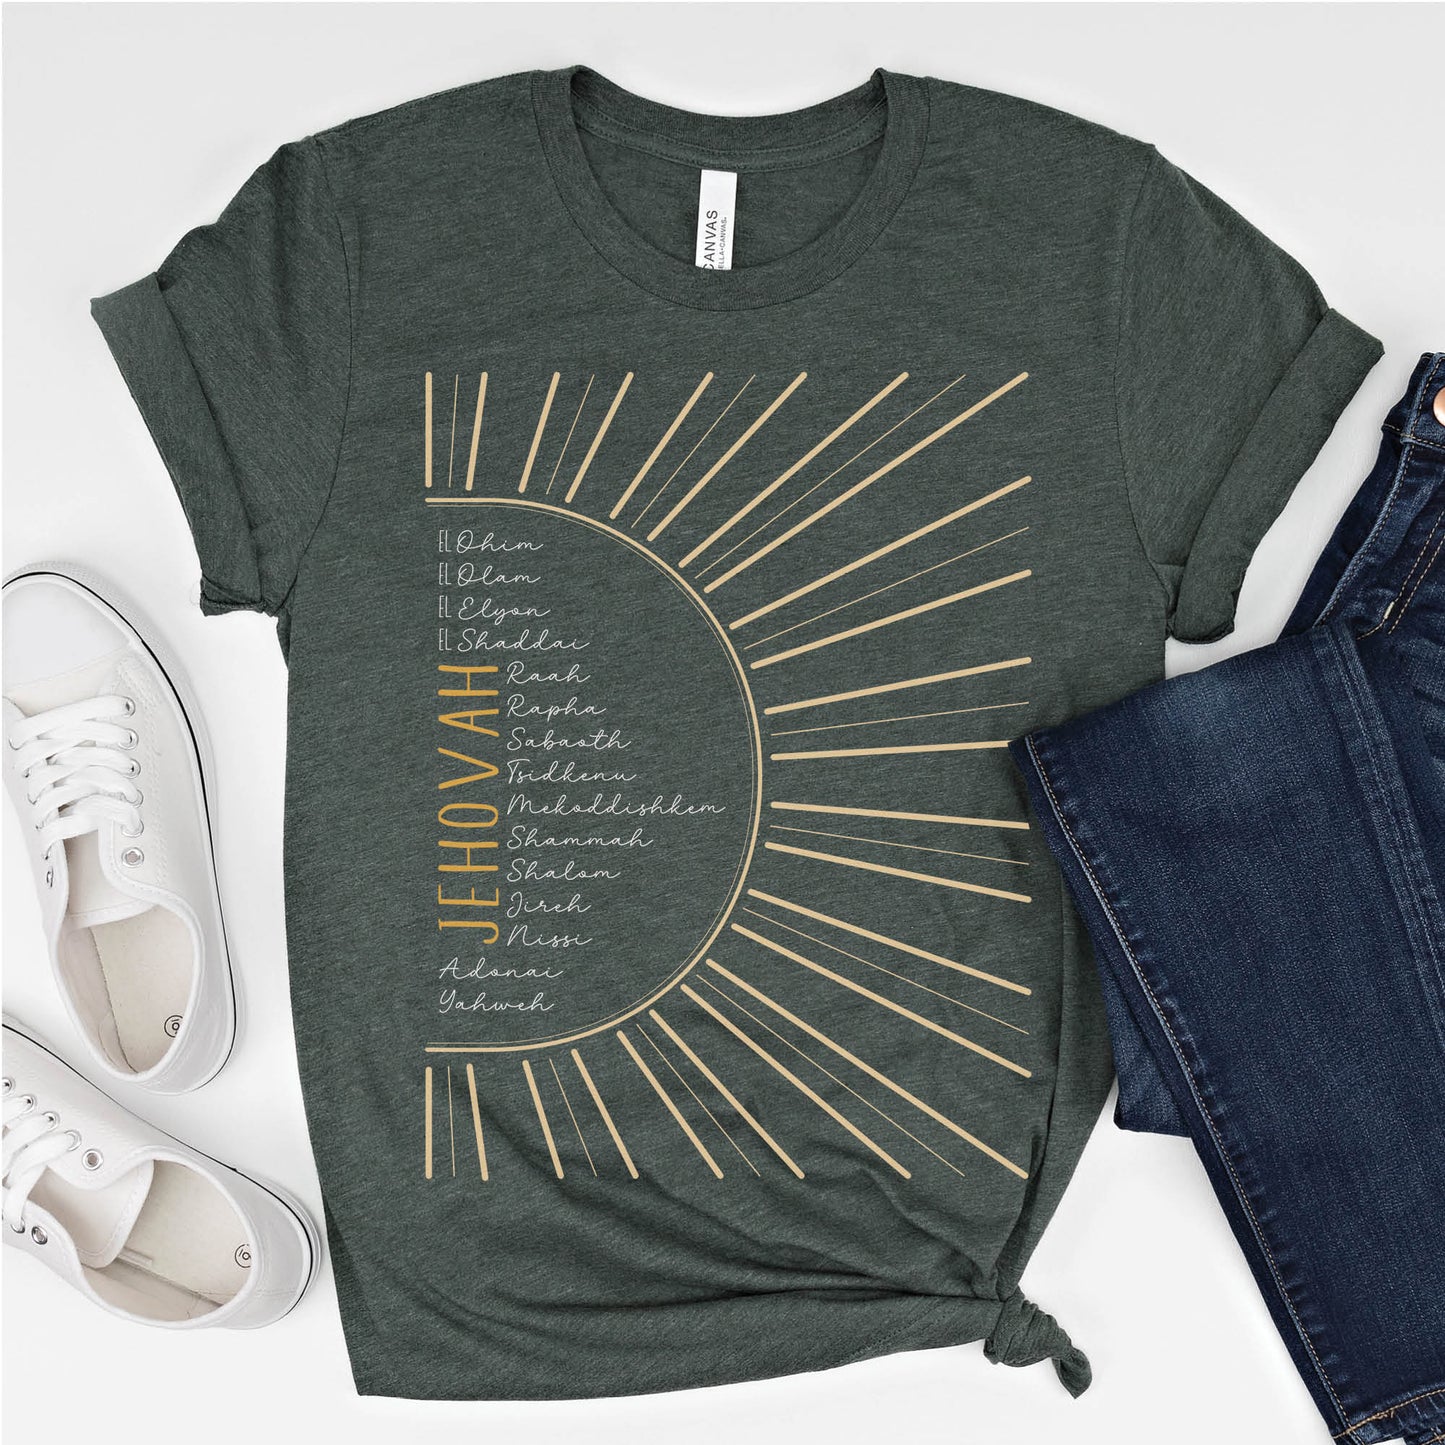 The Names of God Hebrew Christian Old Testament Bible List Sunshine T-Shirt, printed in gold and white on Heather Forest Green Bella-Canvas 3001 t-shirt, women's soft unisex fit regular and plus size tee